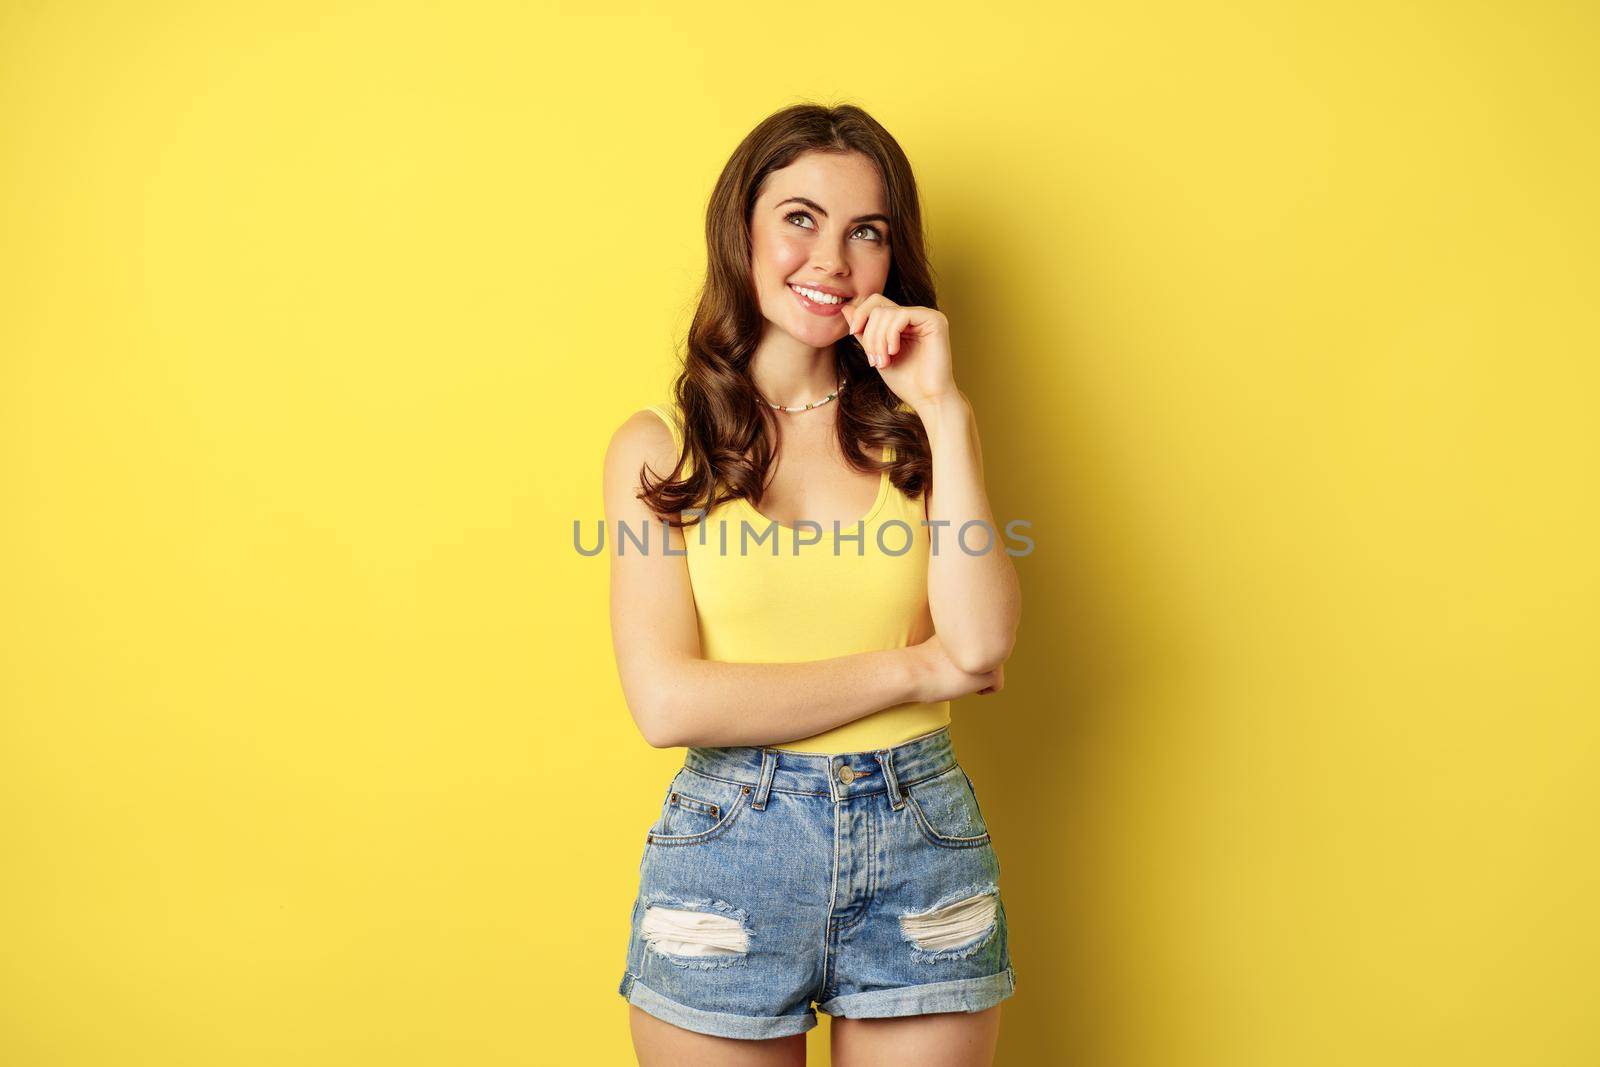 Thinking woman smiling, looking up and deciding, imaging smth, picturing or daydreaming, posing in summer clothes against yellow background.